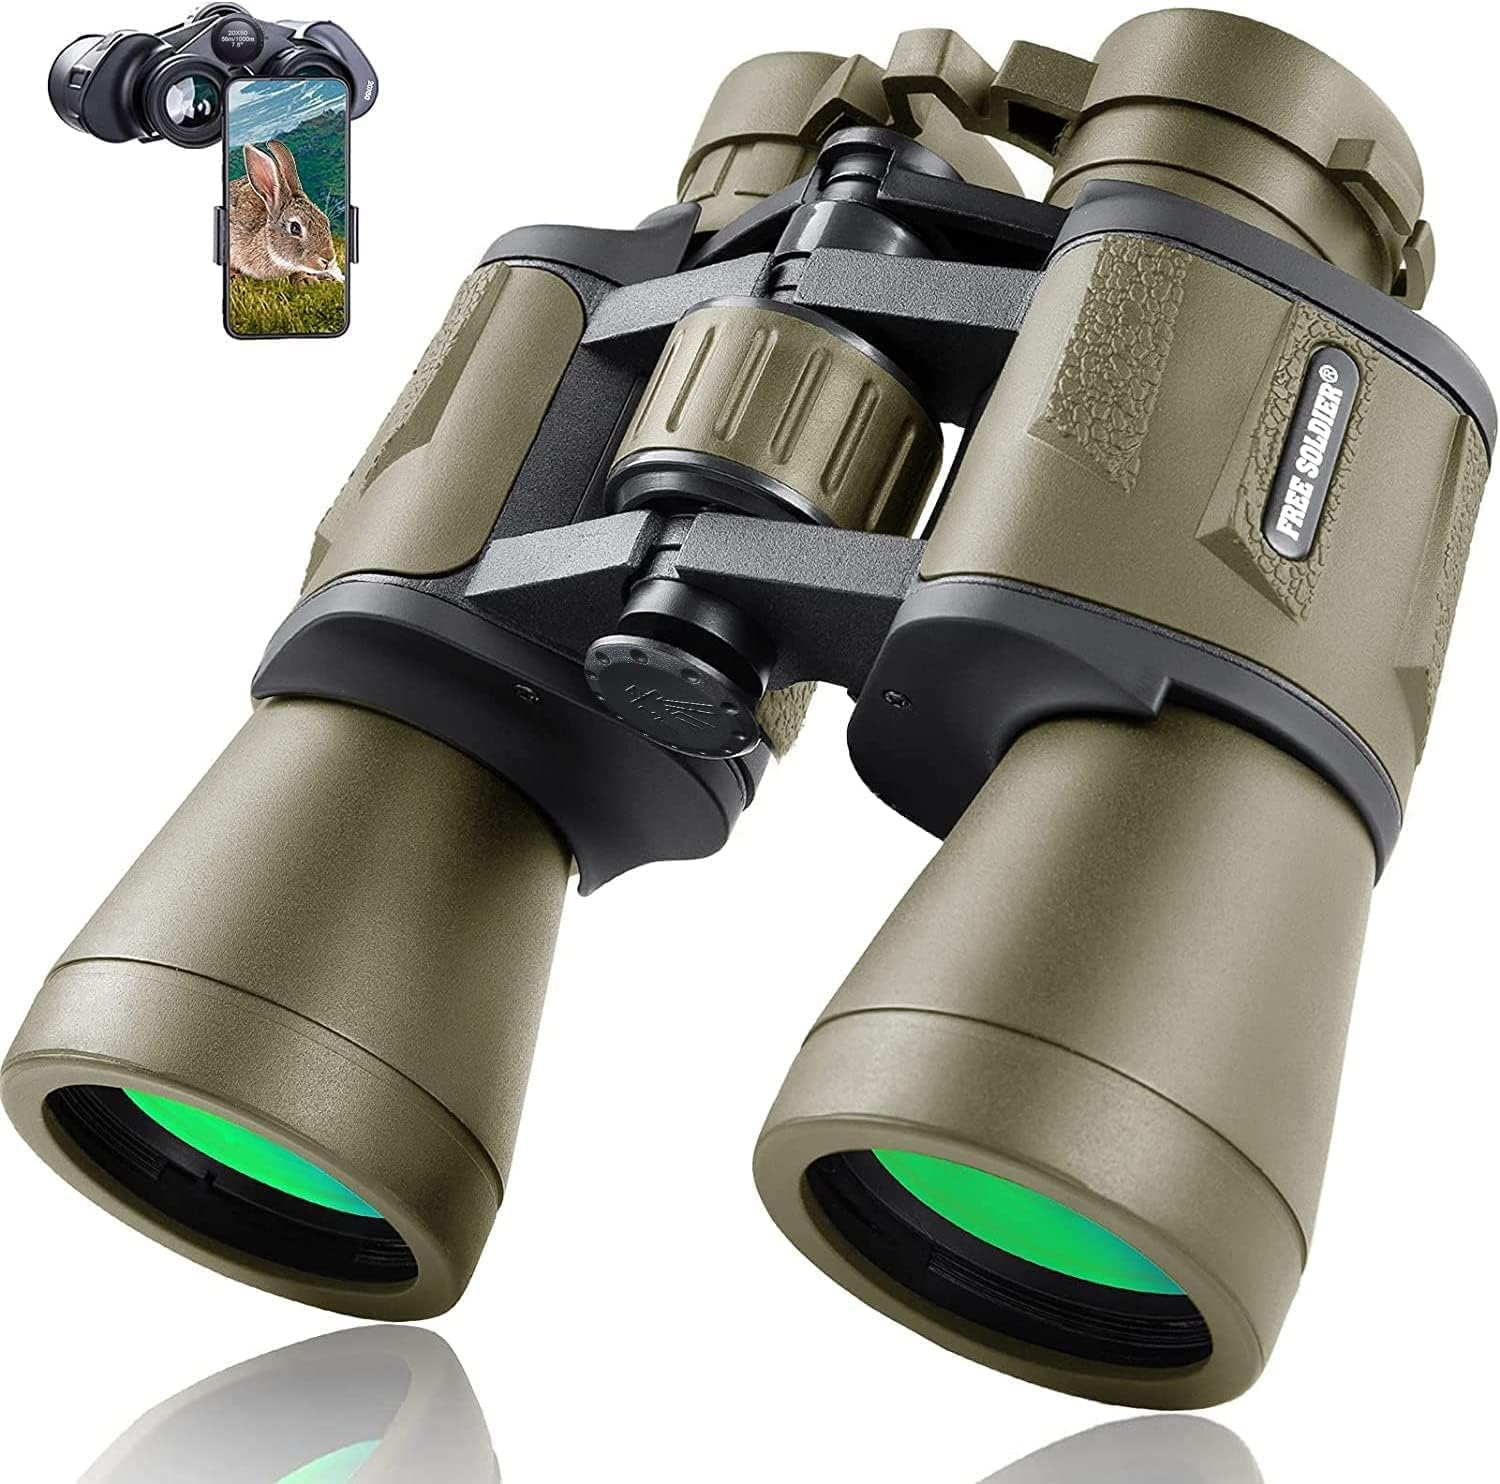 FREE SOLDIER 20x50 Military Binoculars for Adults with Smartphone Adapter - Compact Waterproof Tactical Binoculars for Bird Watching Hunting Hiking Concert Travel Theater with BAK4 Prism FMC Lens, Mud